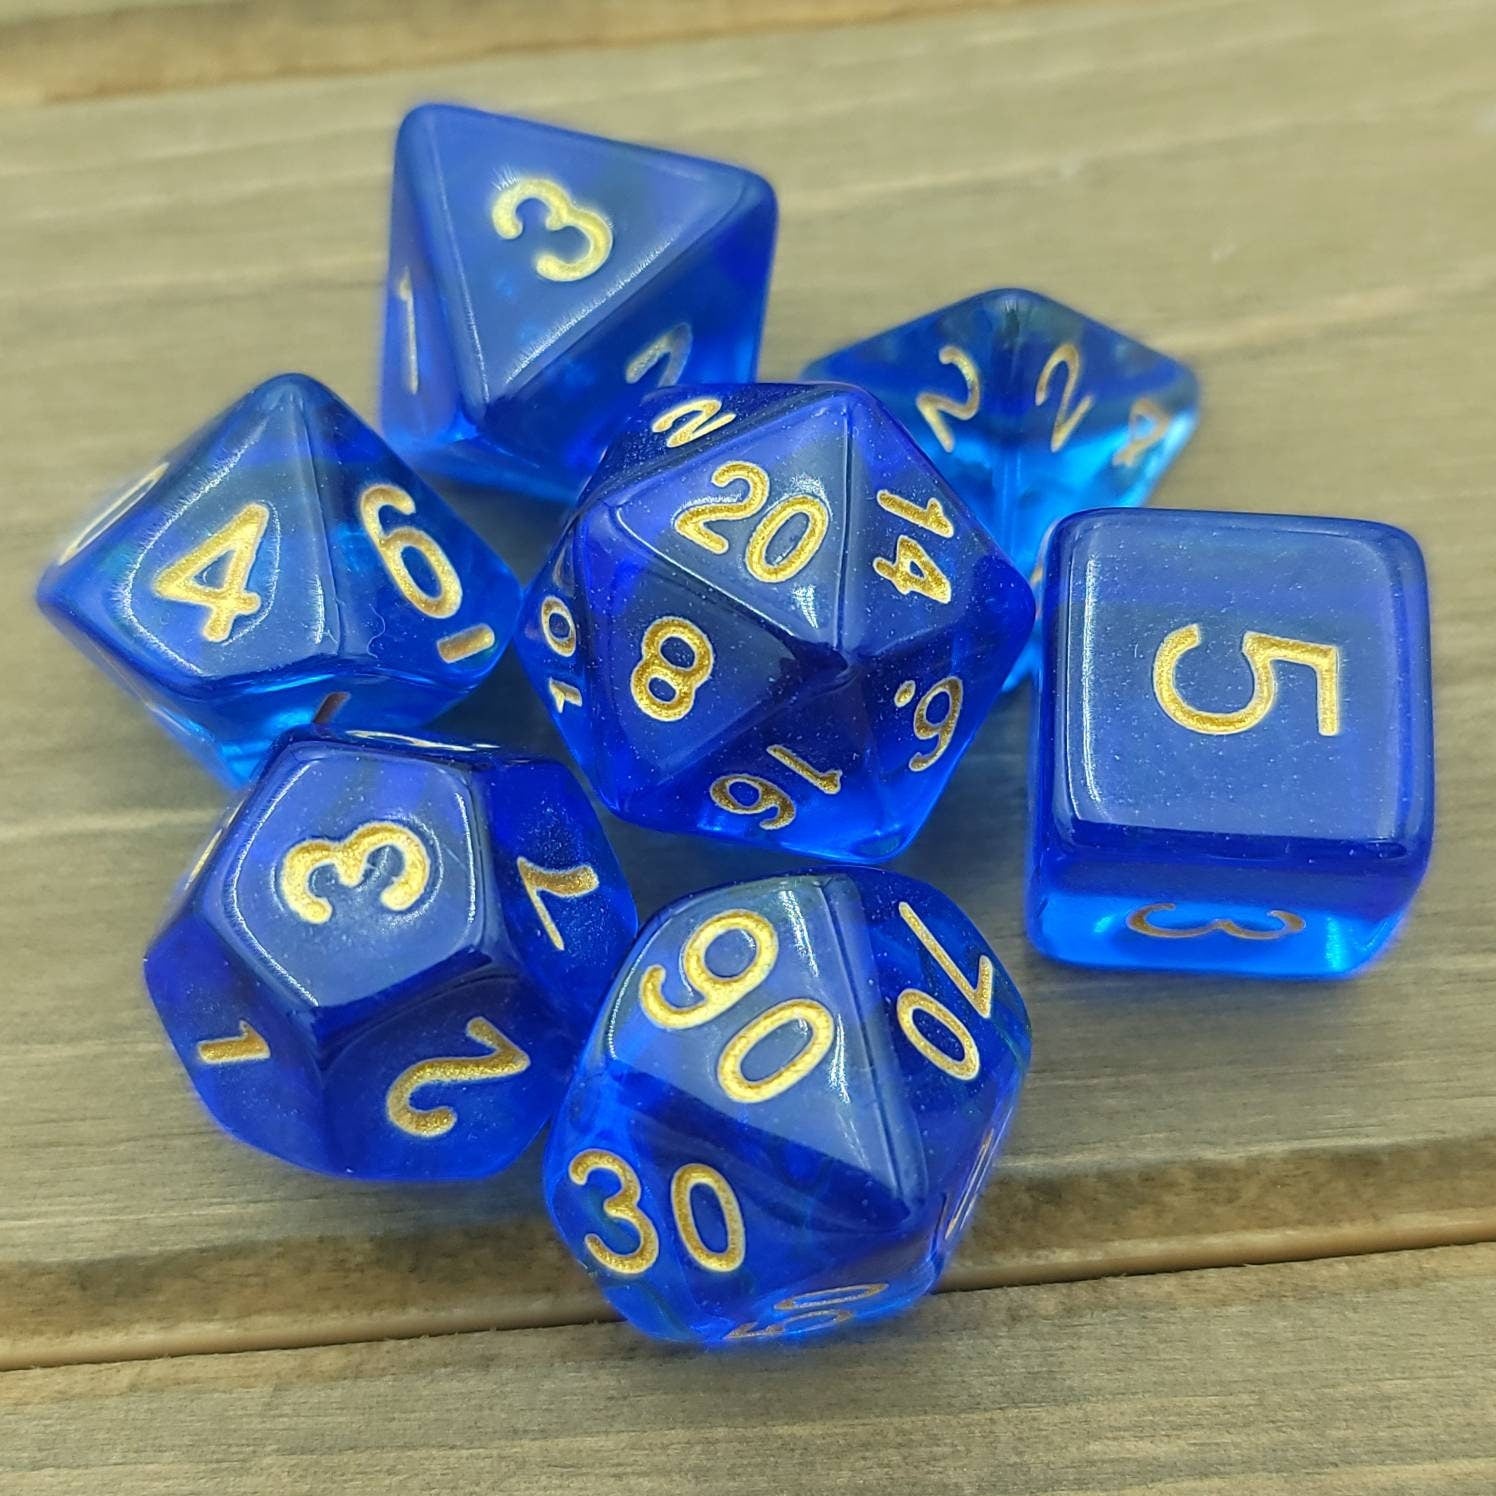 Wizards Sapphire | RPG Dice Set| RPG Dice | Polyhedral Dice Set | Dungeons and Dragons | DnD Dice Set | Gaming Dice Set